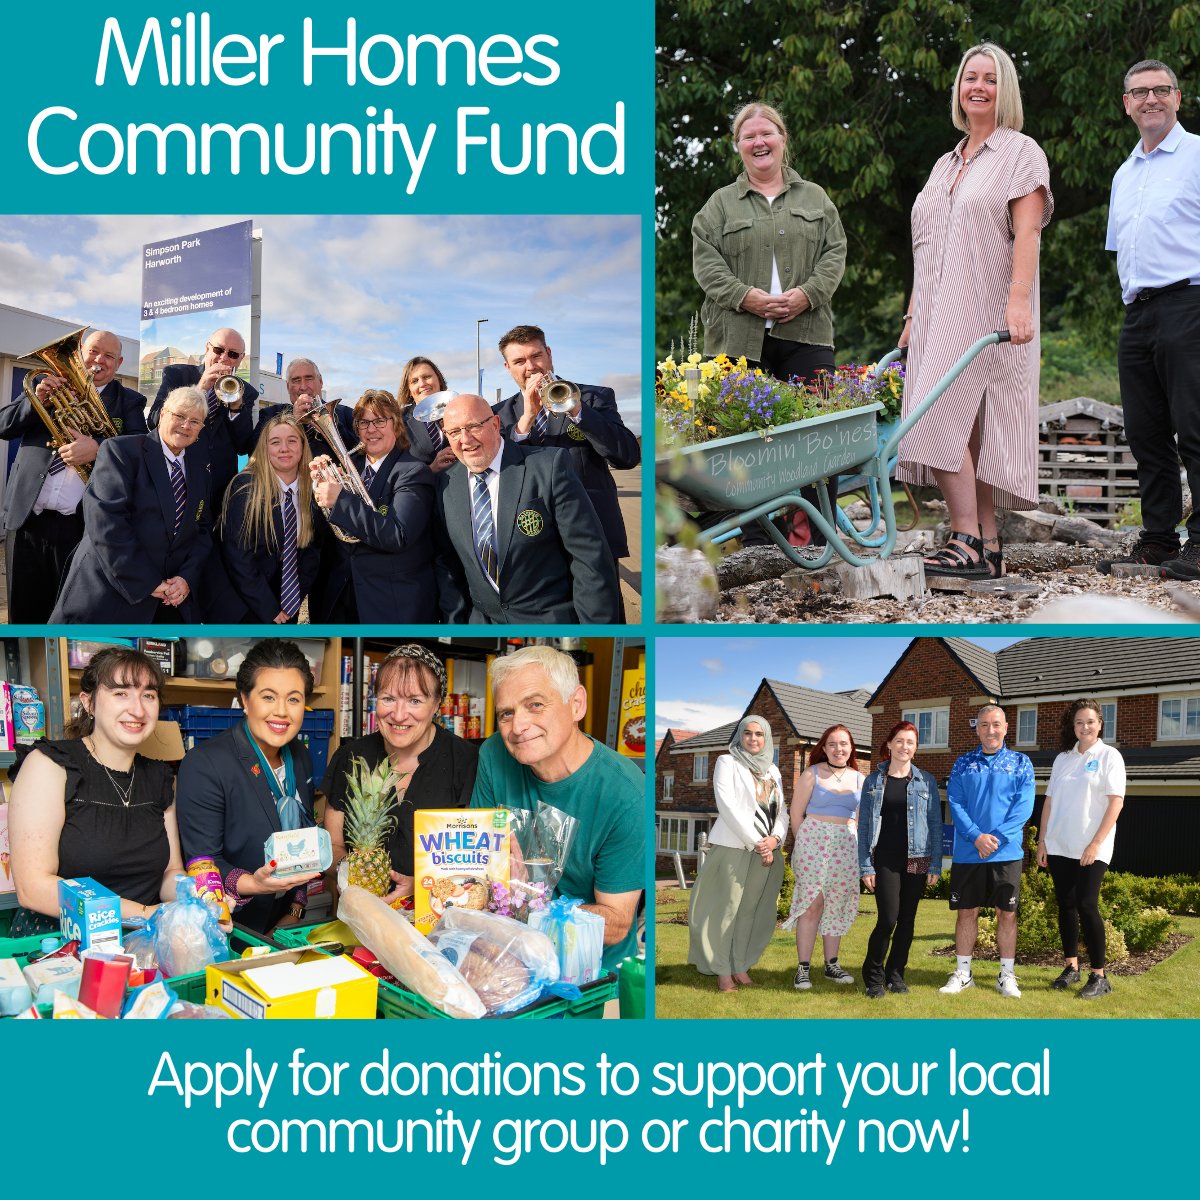 The next round of our Miller Homes Community Fund opens TODAY!

Apply for donations of £250 to £2000 to support your local community group or charity now.

Find out more: millerhomes.co.uk/corporate/comm…

#CharityFunding #MillerHomes #CommunityFund